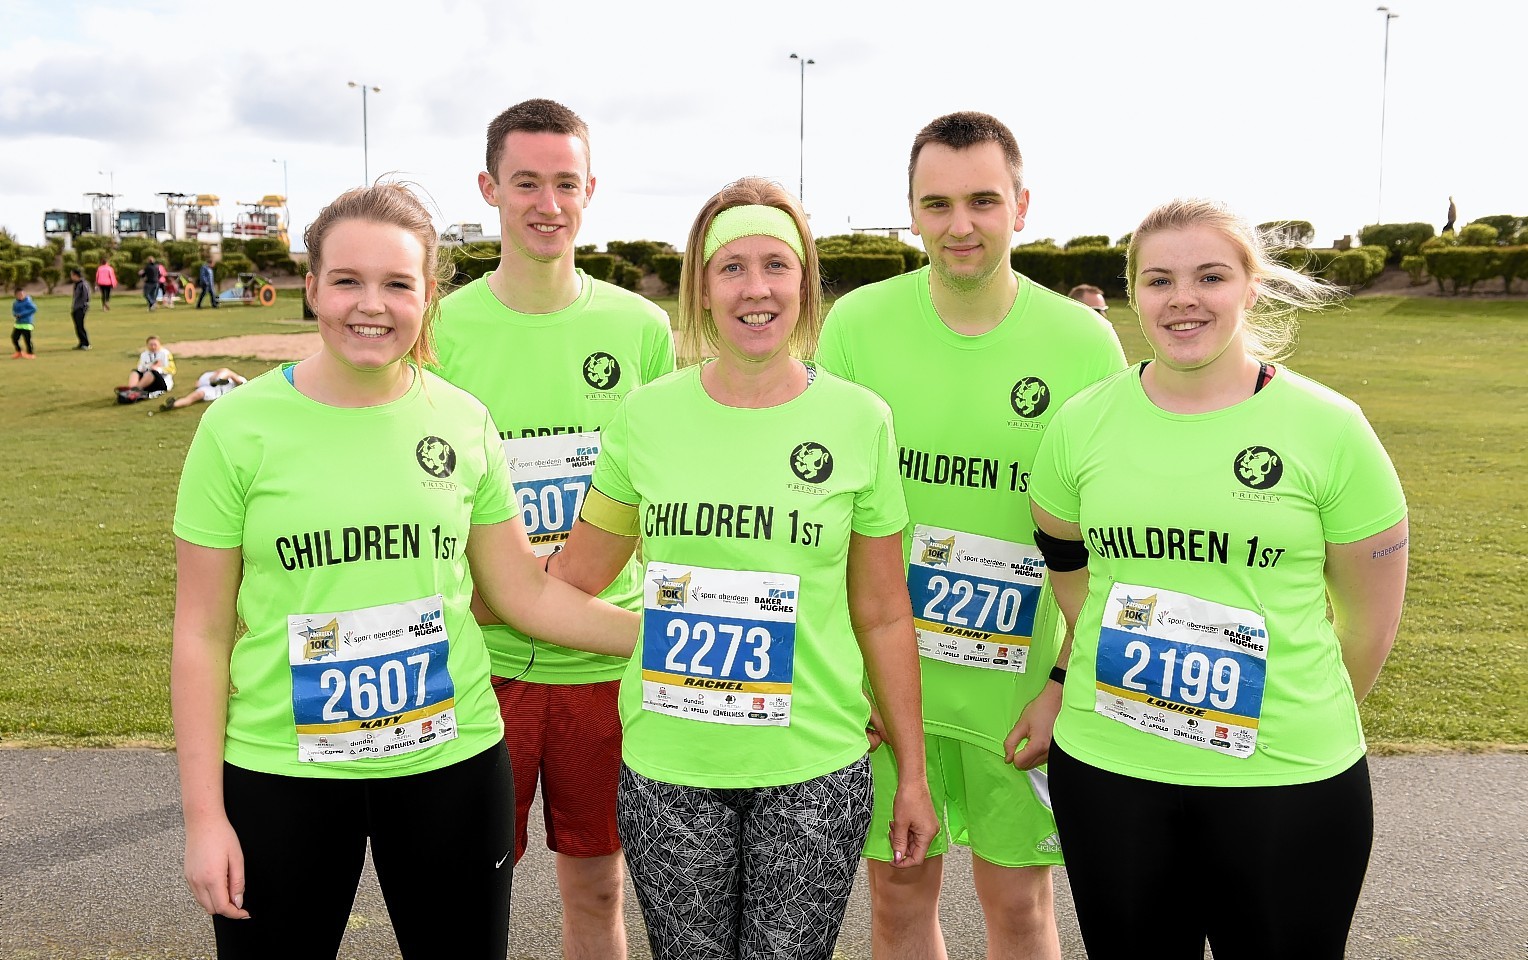 Runners Katy Ferguson, Andrew Reilly, Rachel O'Donnell, Danny Sandison and Louise Green prepare to take part in the race. Picture by Kevin Emslie